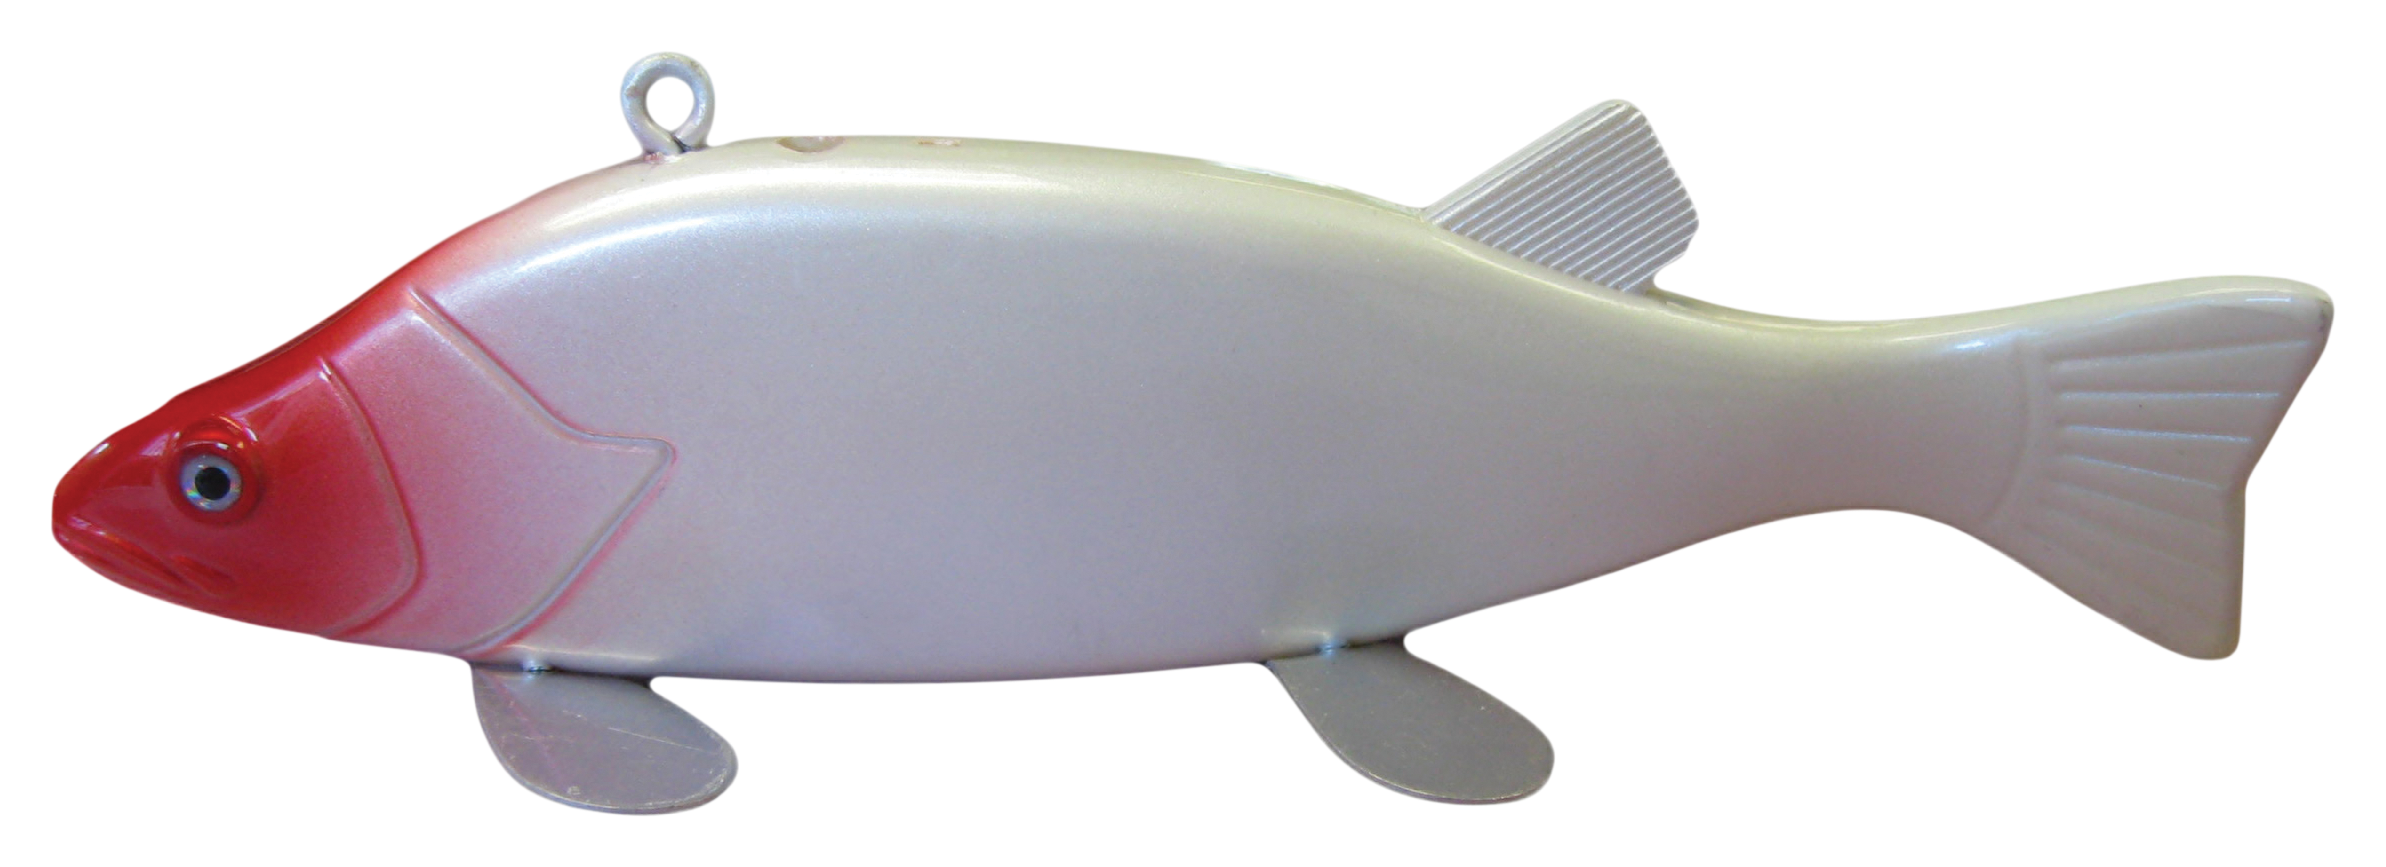 Lakco Plastic Spearing Decoy - 8' - Red/White